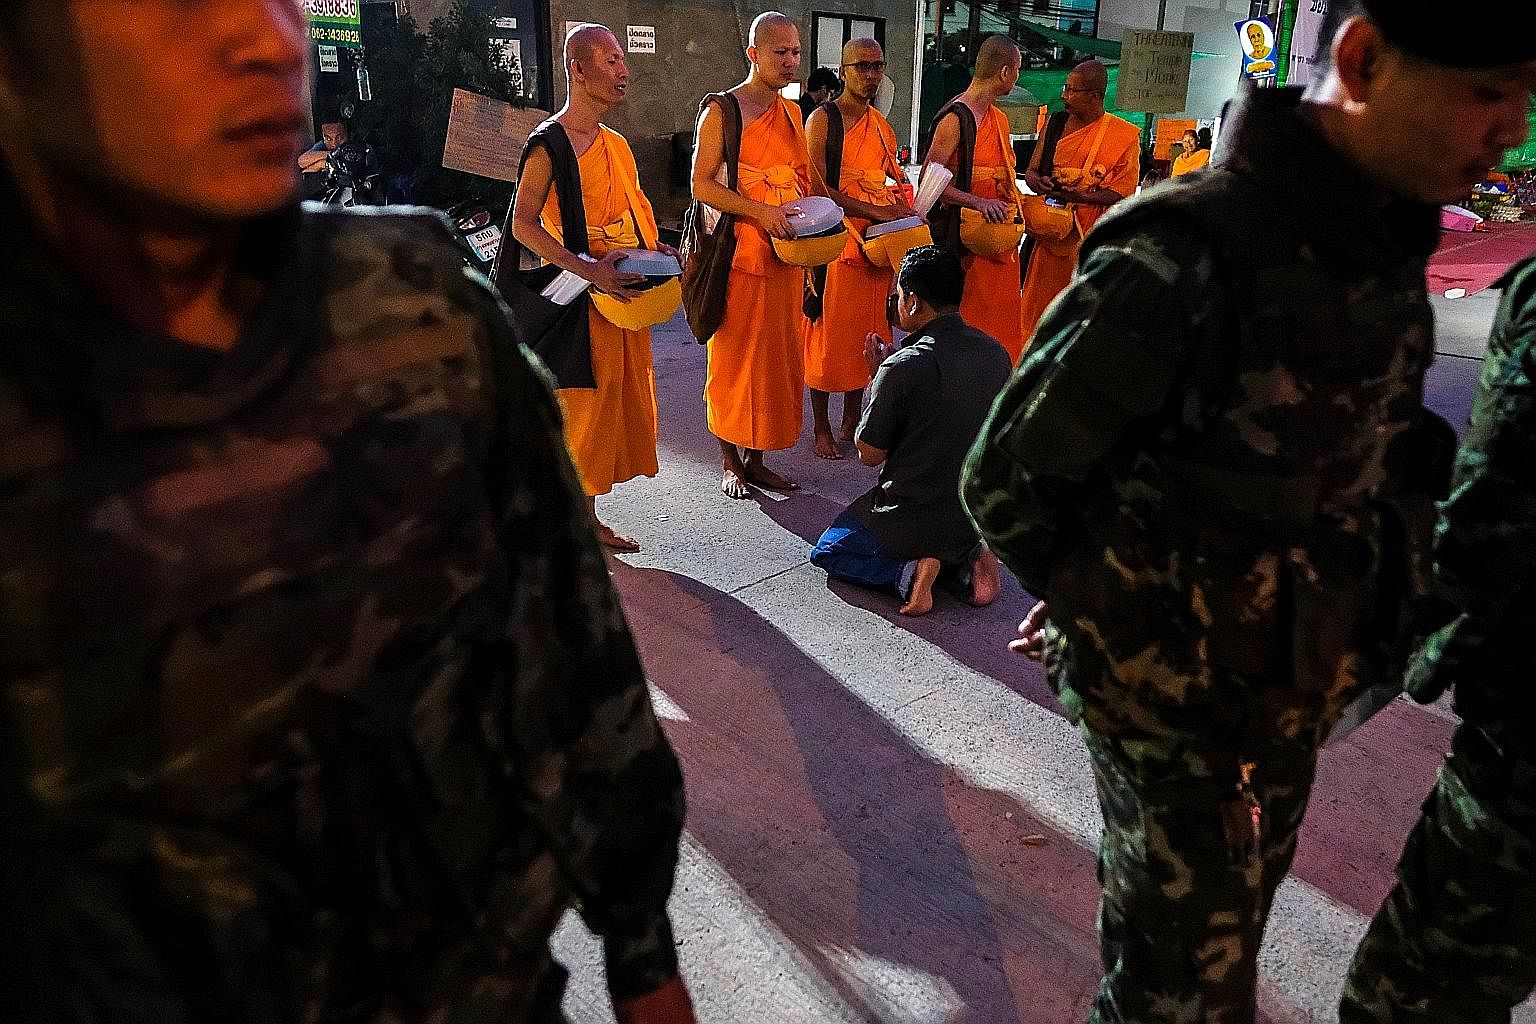 Monks receiving food from supporters. Amid a manhunt being carried out under the junta's wide-ranging powers, the temple has staged an international media campaign and alleged that its food supply has been curtailed.